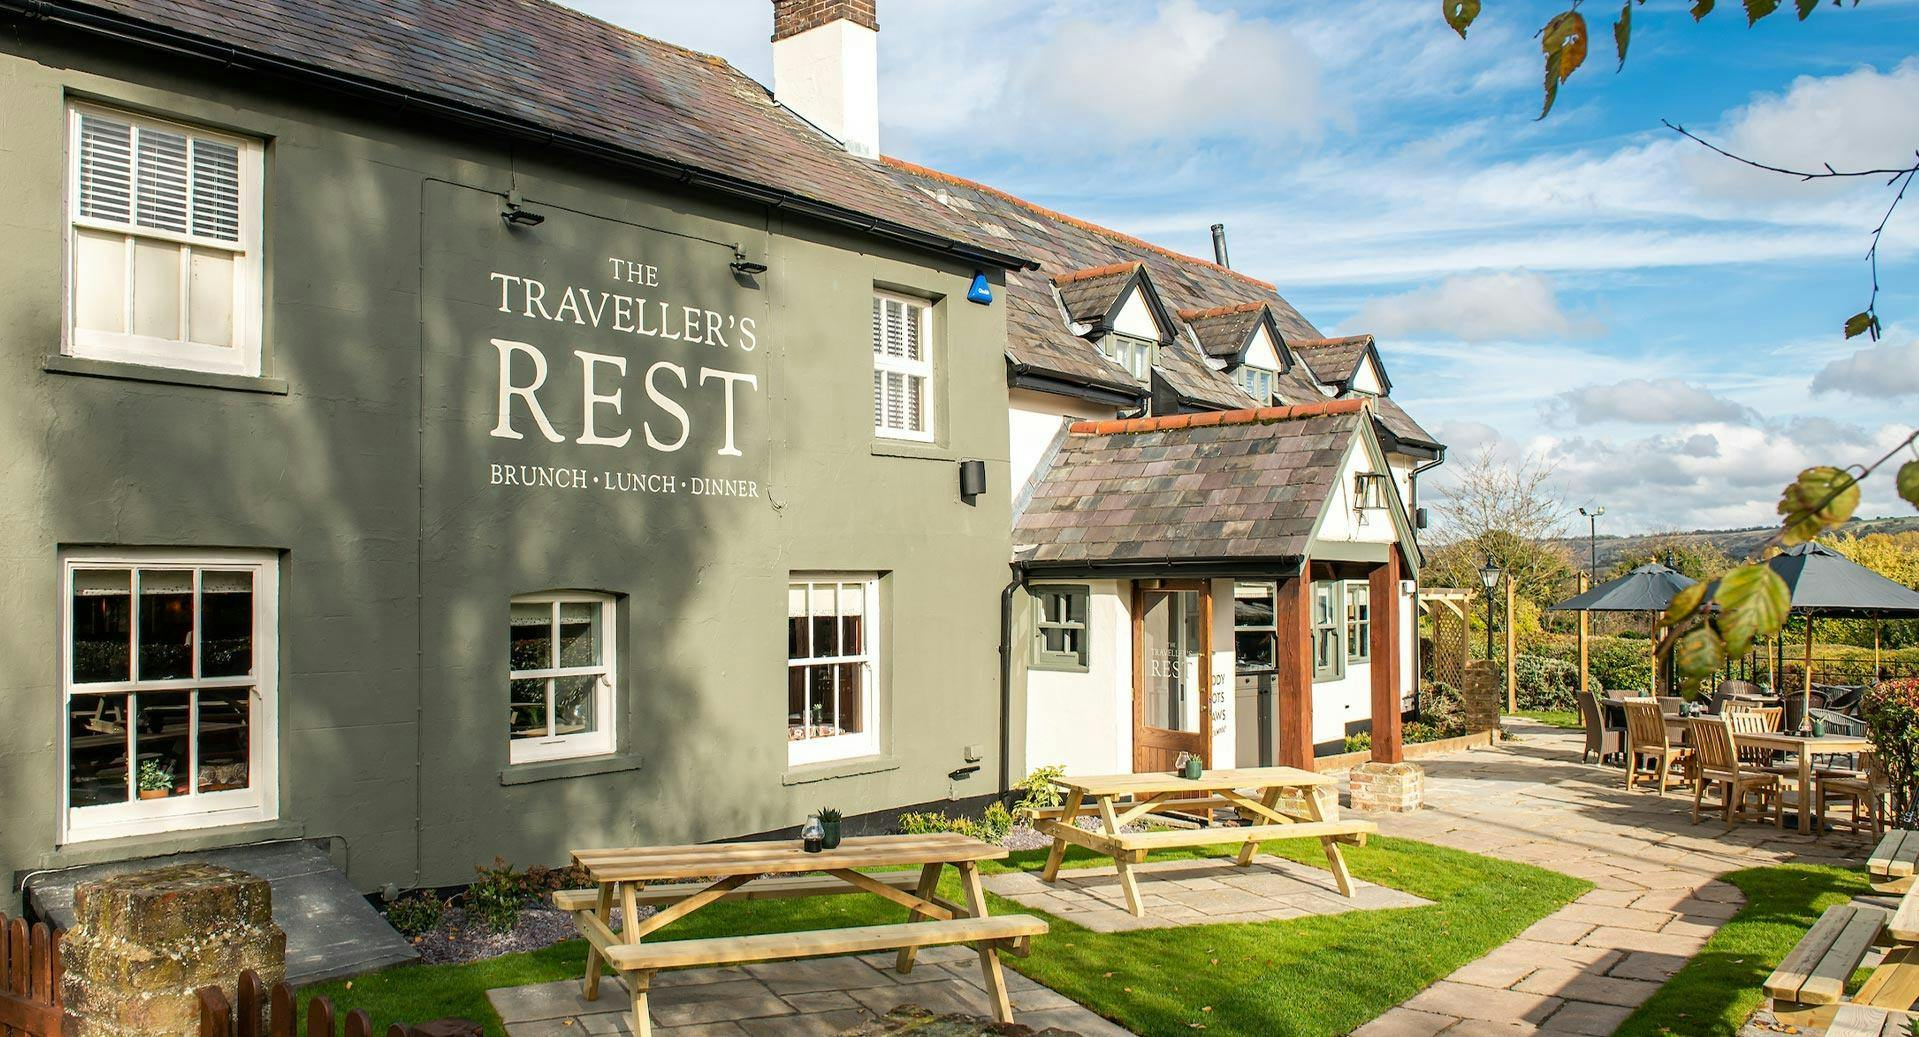 Photo of restaurant The Travellers Rest - Caerphilly in Thornhill, Caerphilly